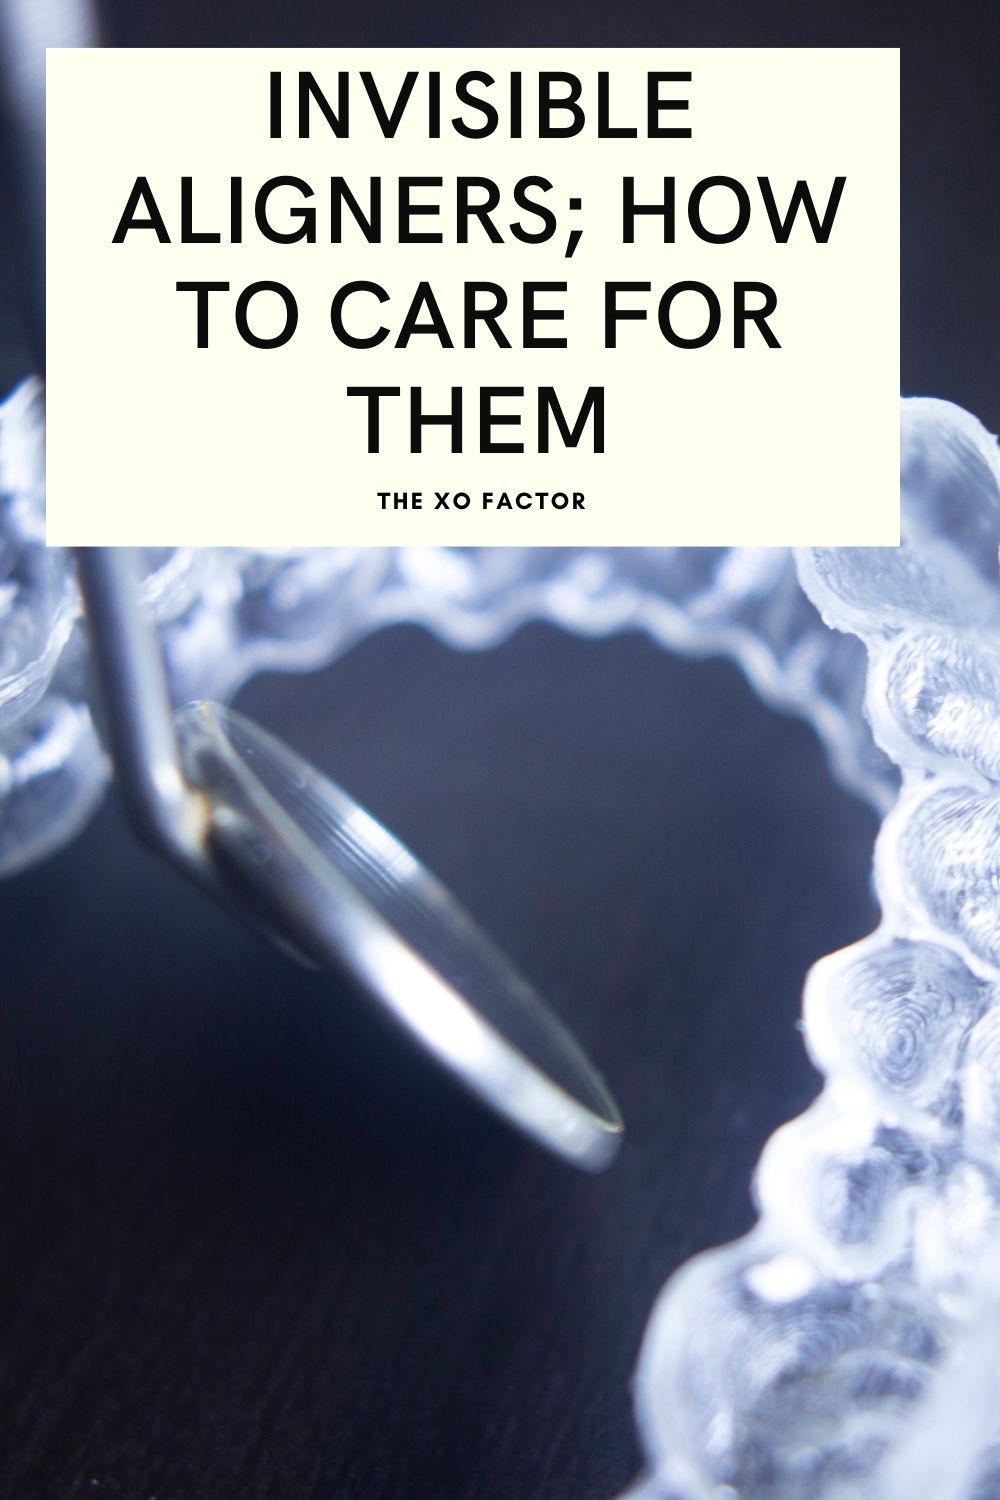 Invisible aligners; how to care for them